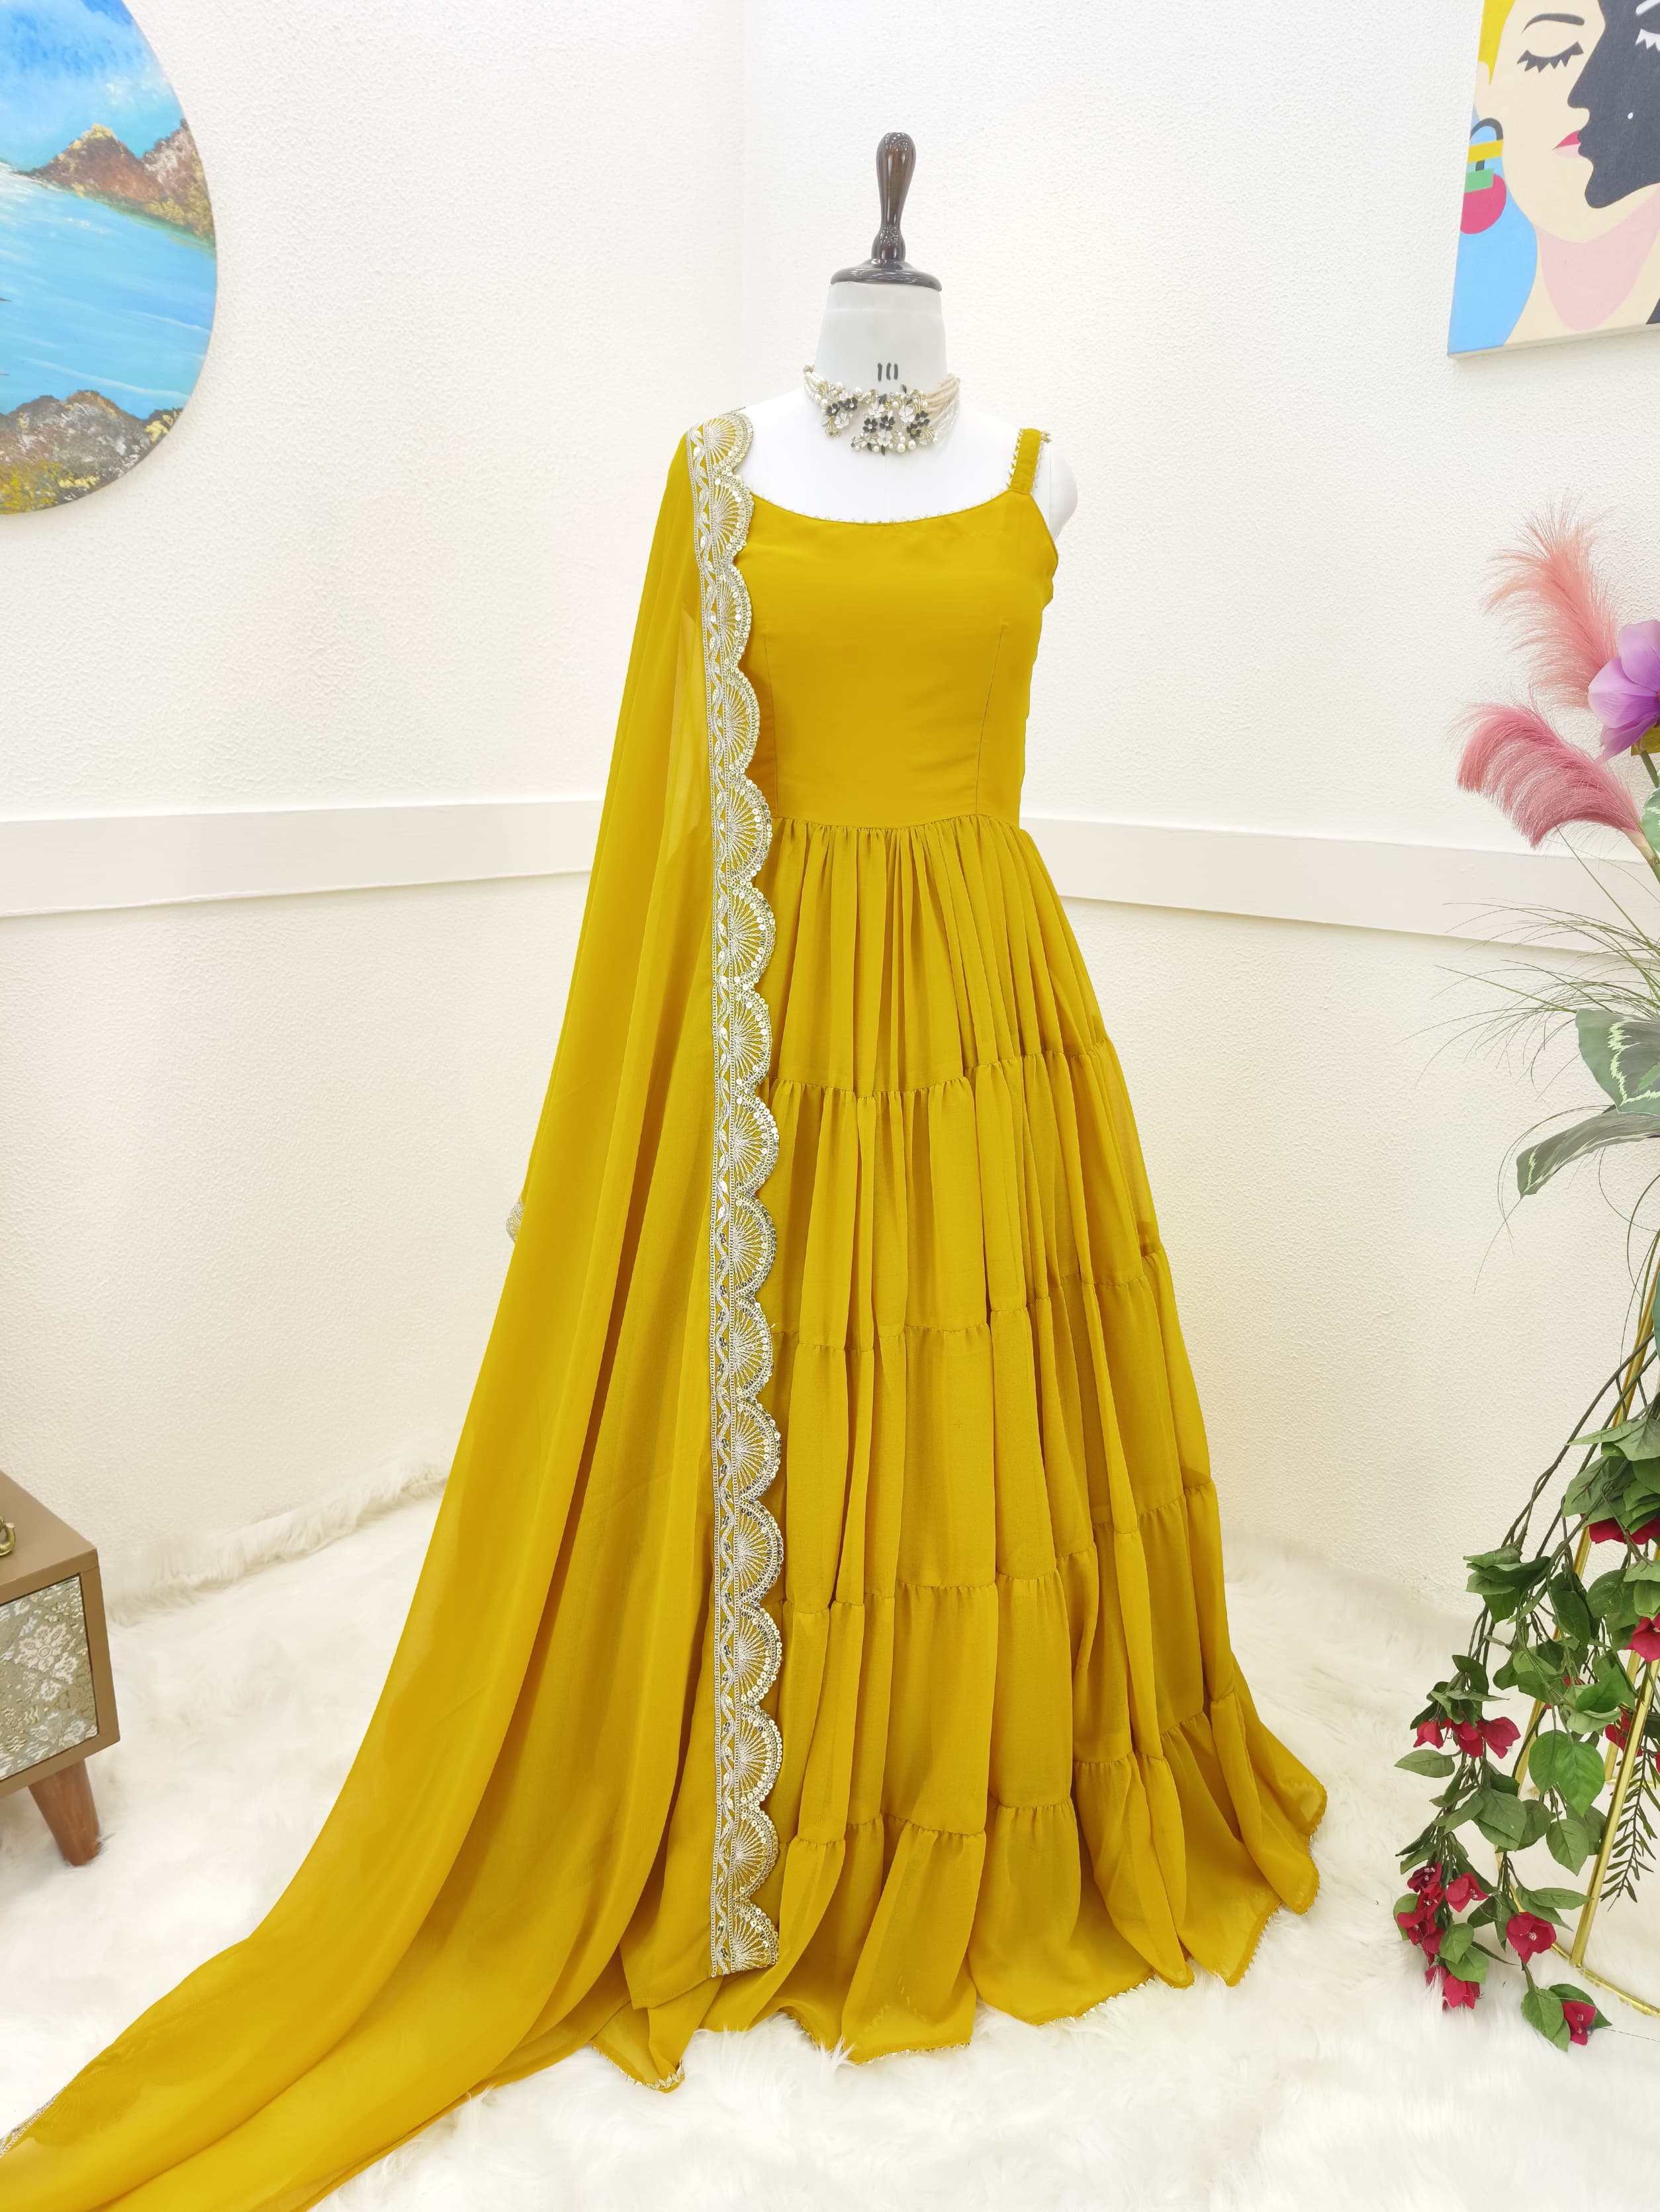 Fashionable Ruffle Style Plain Yellow Color Long Gown